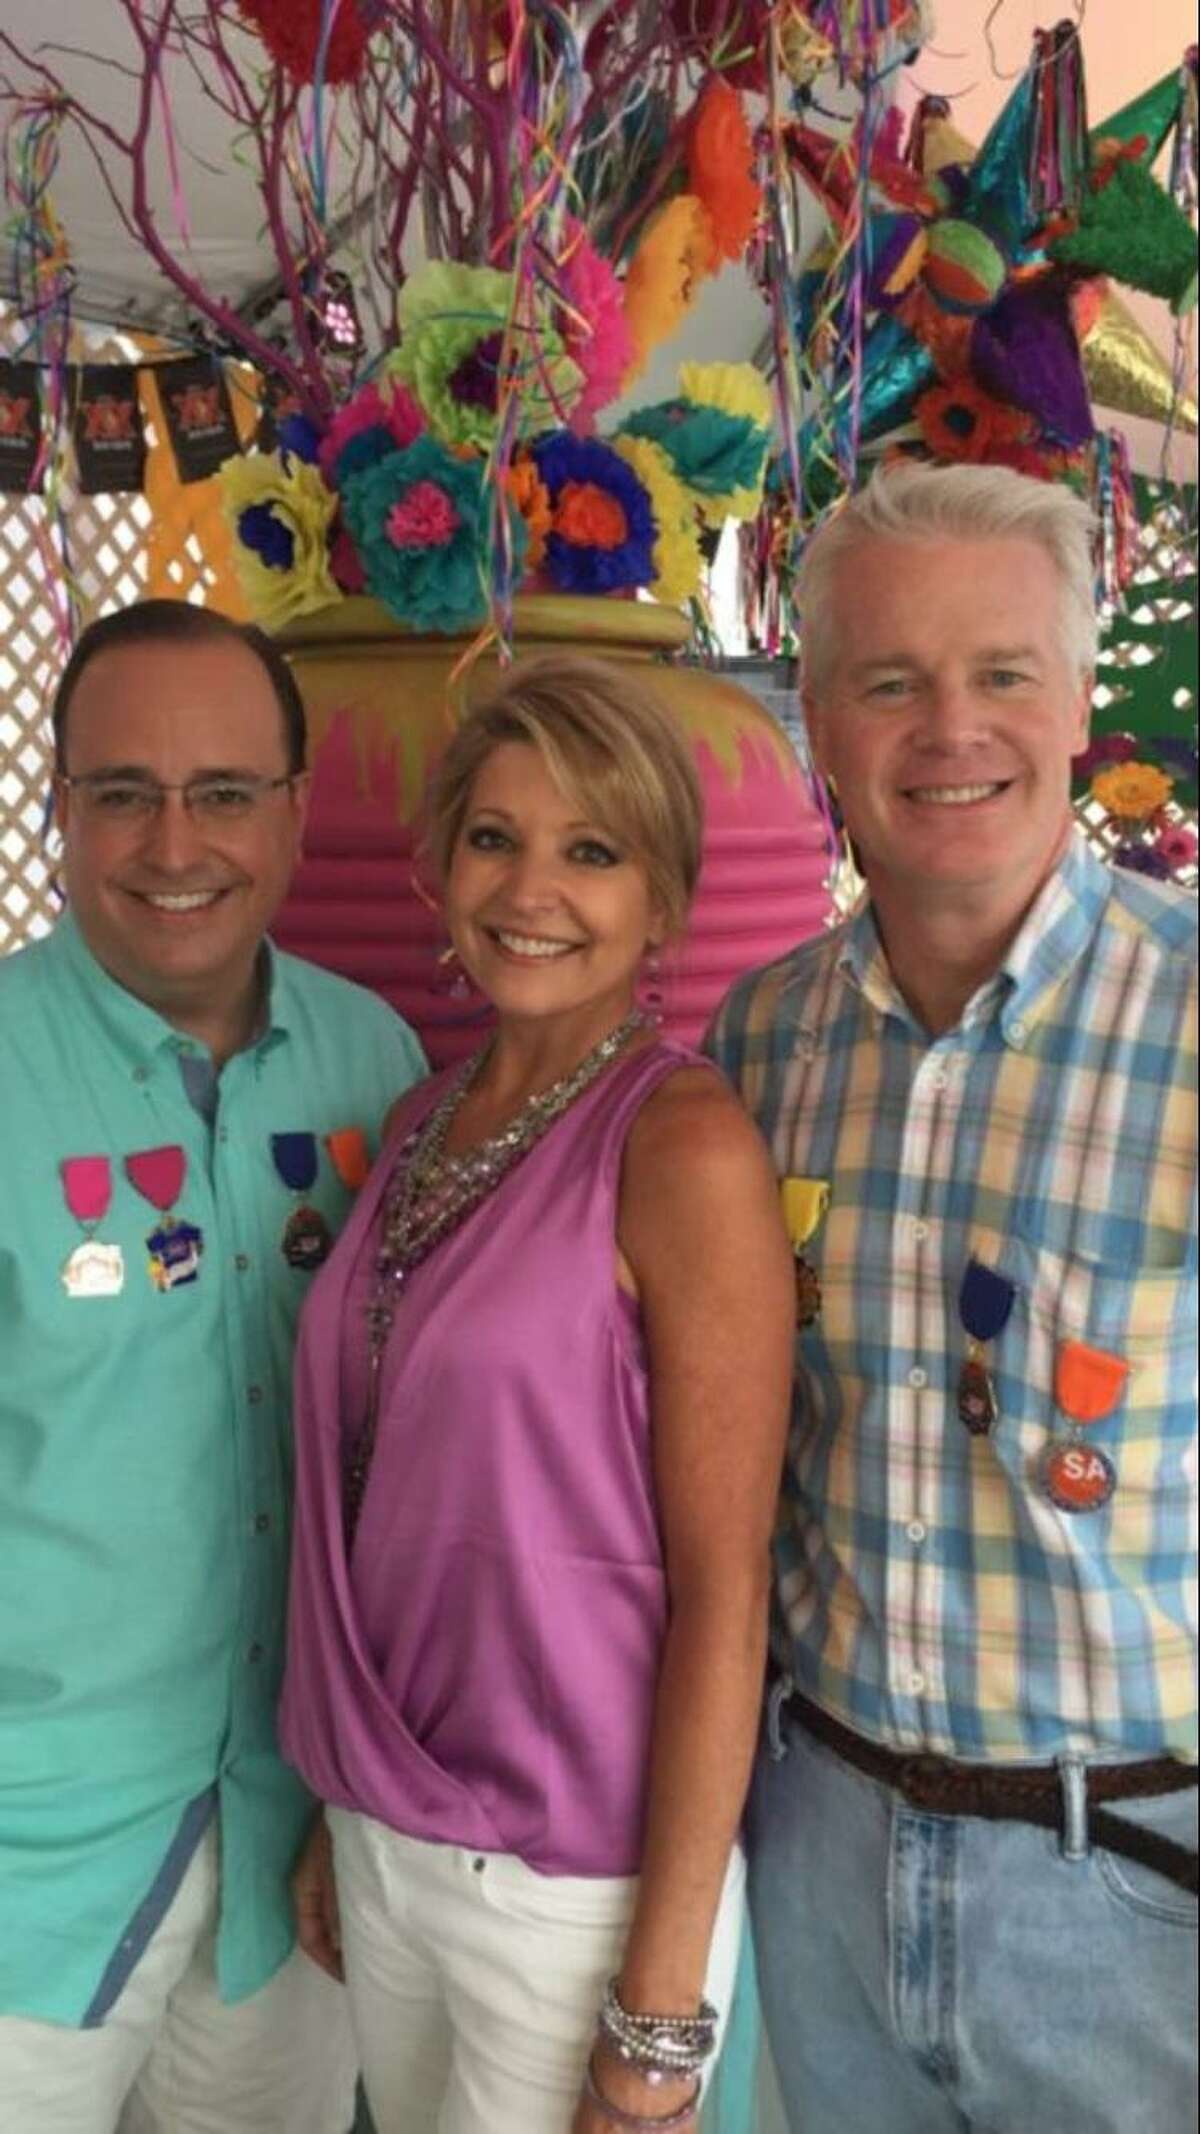 KSAT morning co-anchors Leslie Mouton and Mark Austin, left, and weathercaster Mike Osterhage, have been studying up for their Battle of Flowers duties Friday.